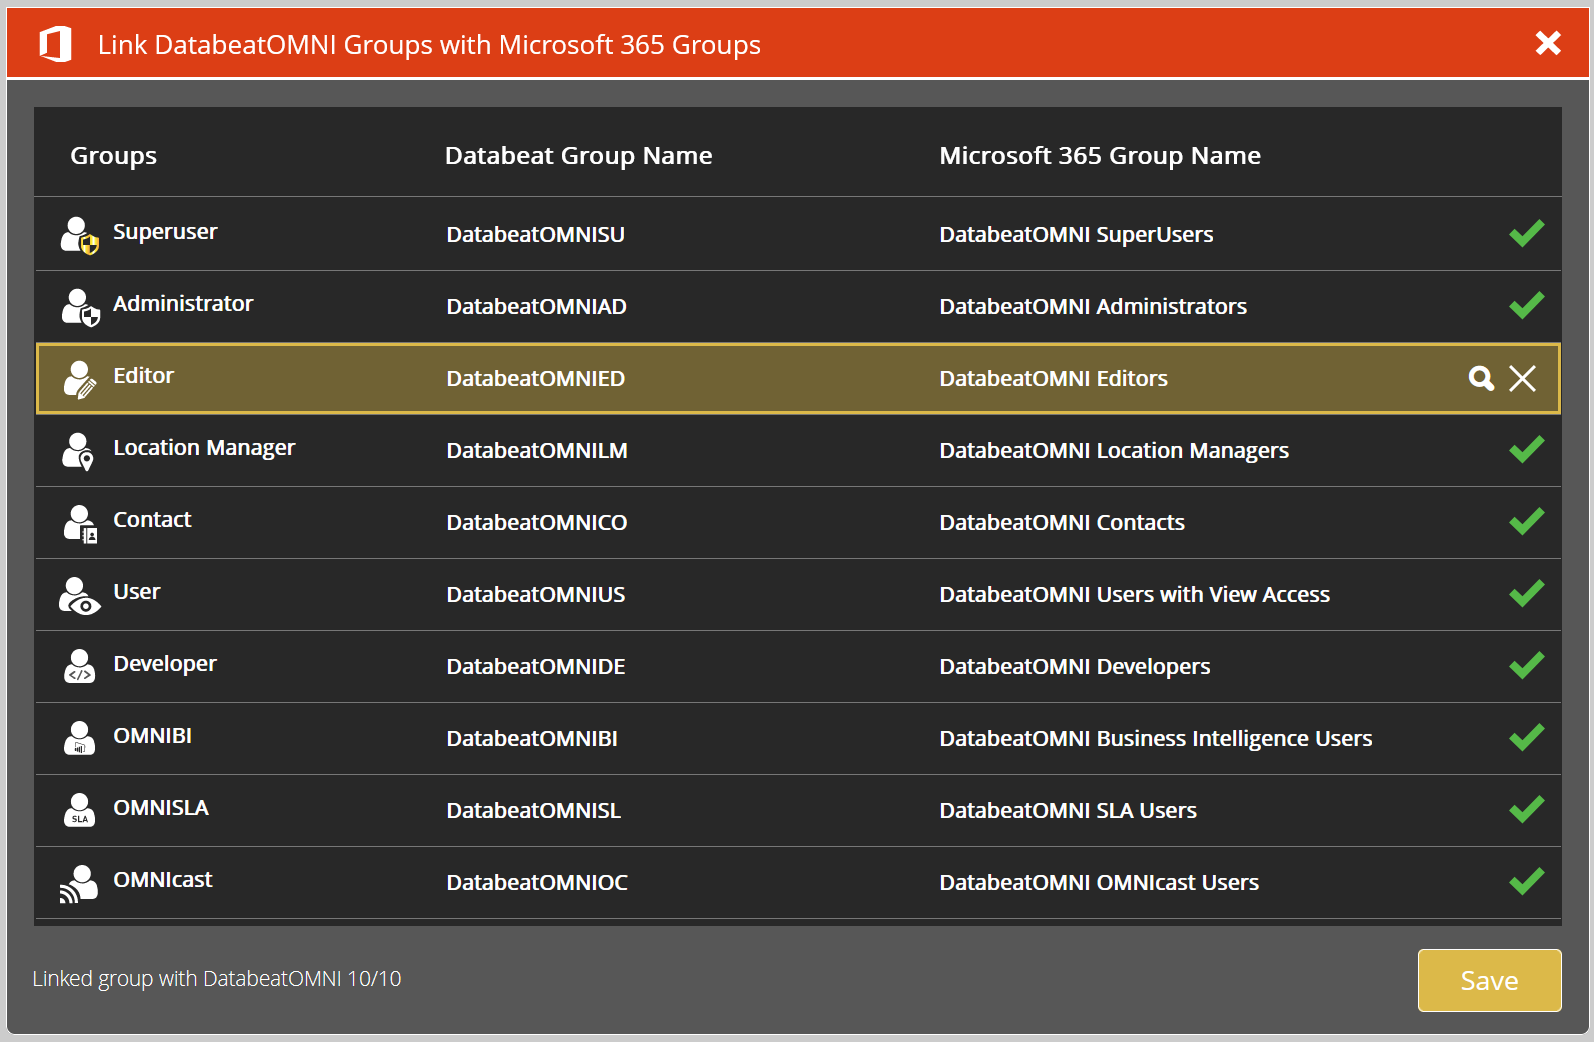 Microsoft 365 Groups linked in DatabeatOMNI successfully 